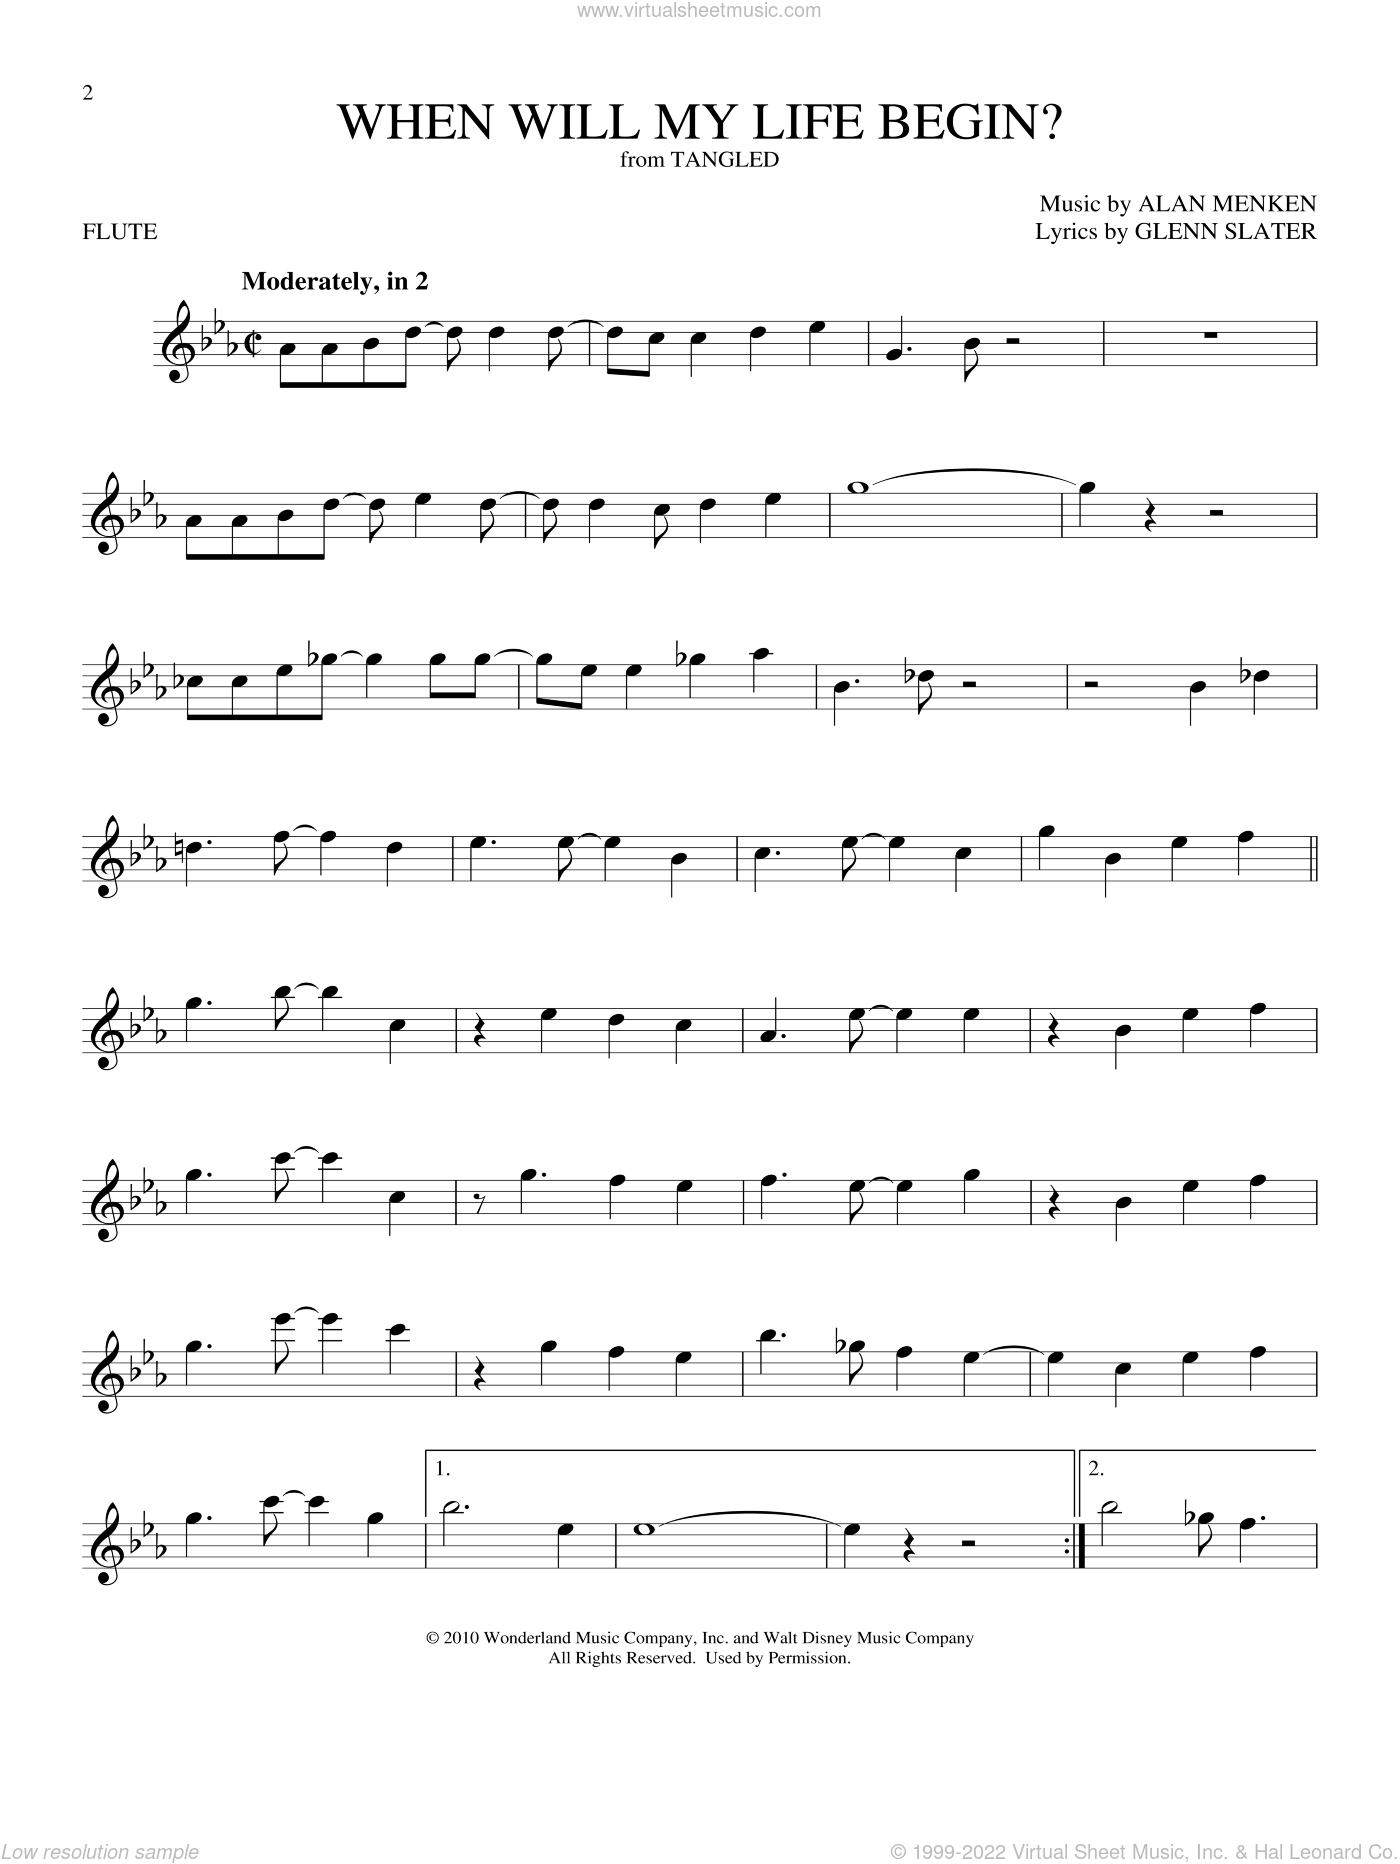 Moore - When Will My Life Begin? (from Disney's Tangled) sheet music